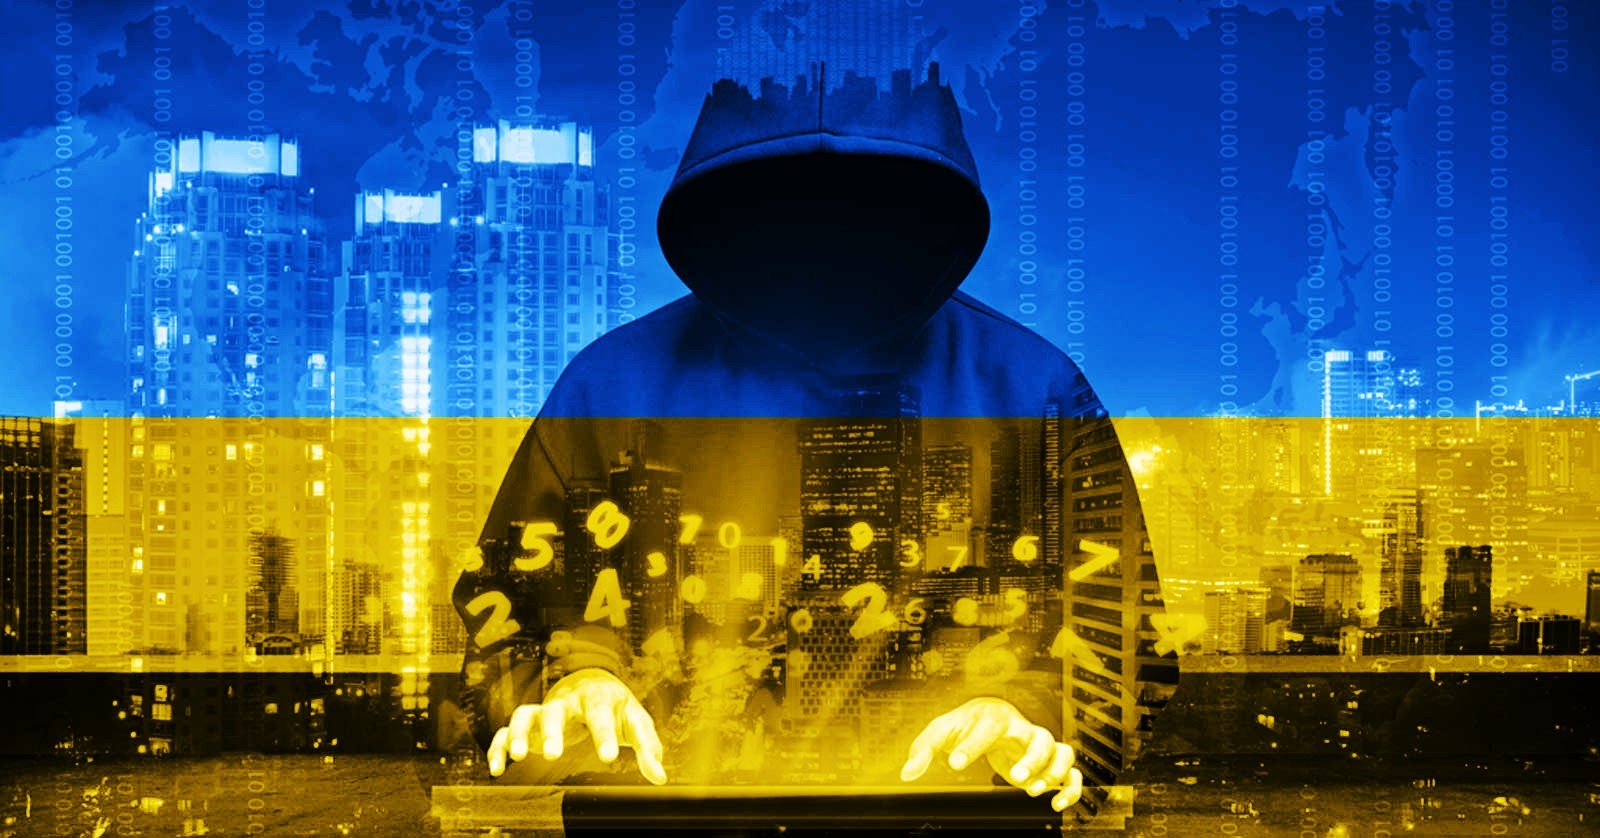 ukrainian-hackers-take-down-service-provider-for-russian-banks